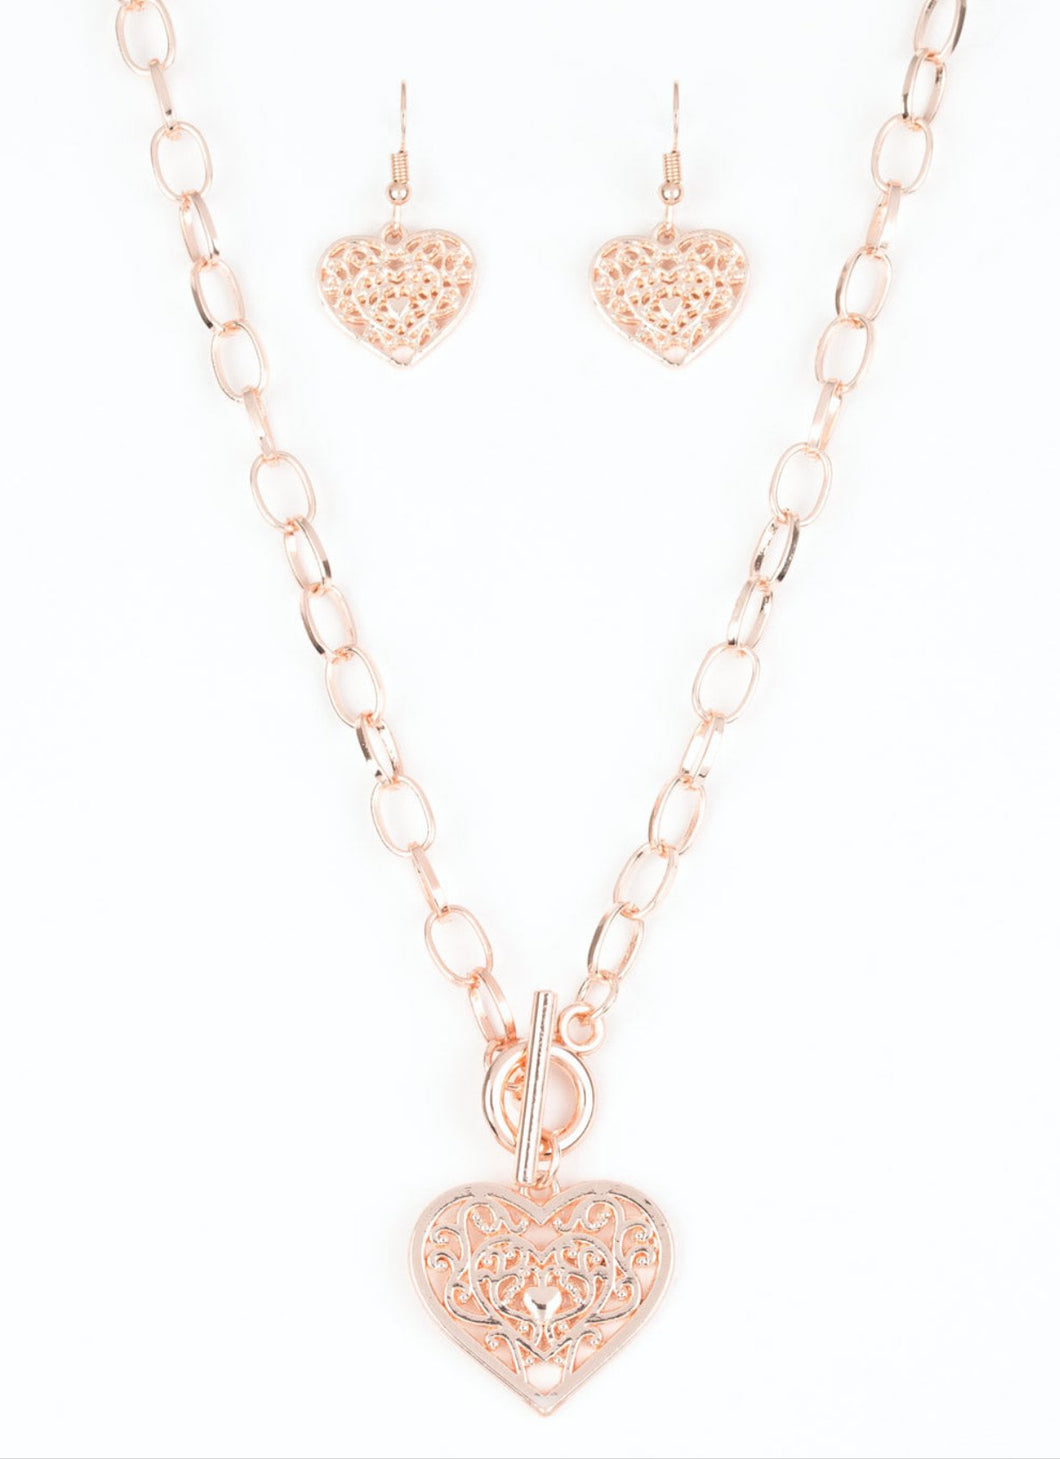 Romance the Heart Necklace and Earrings